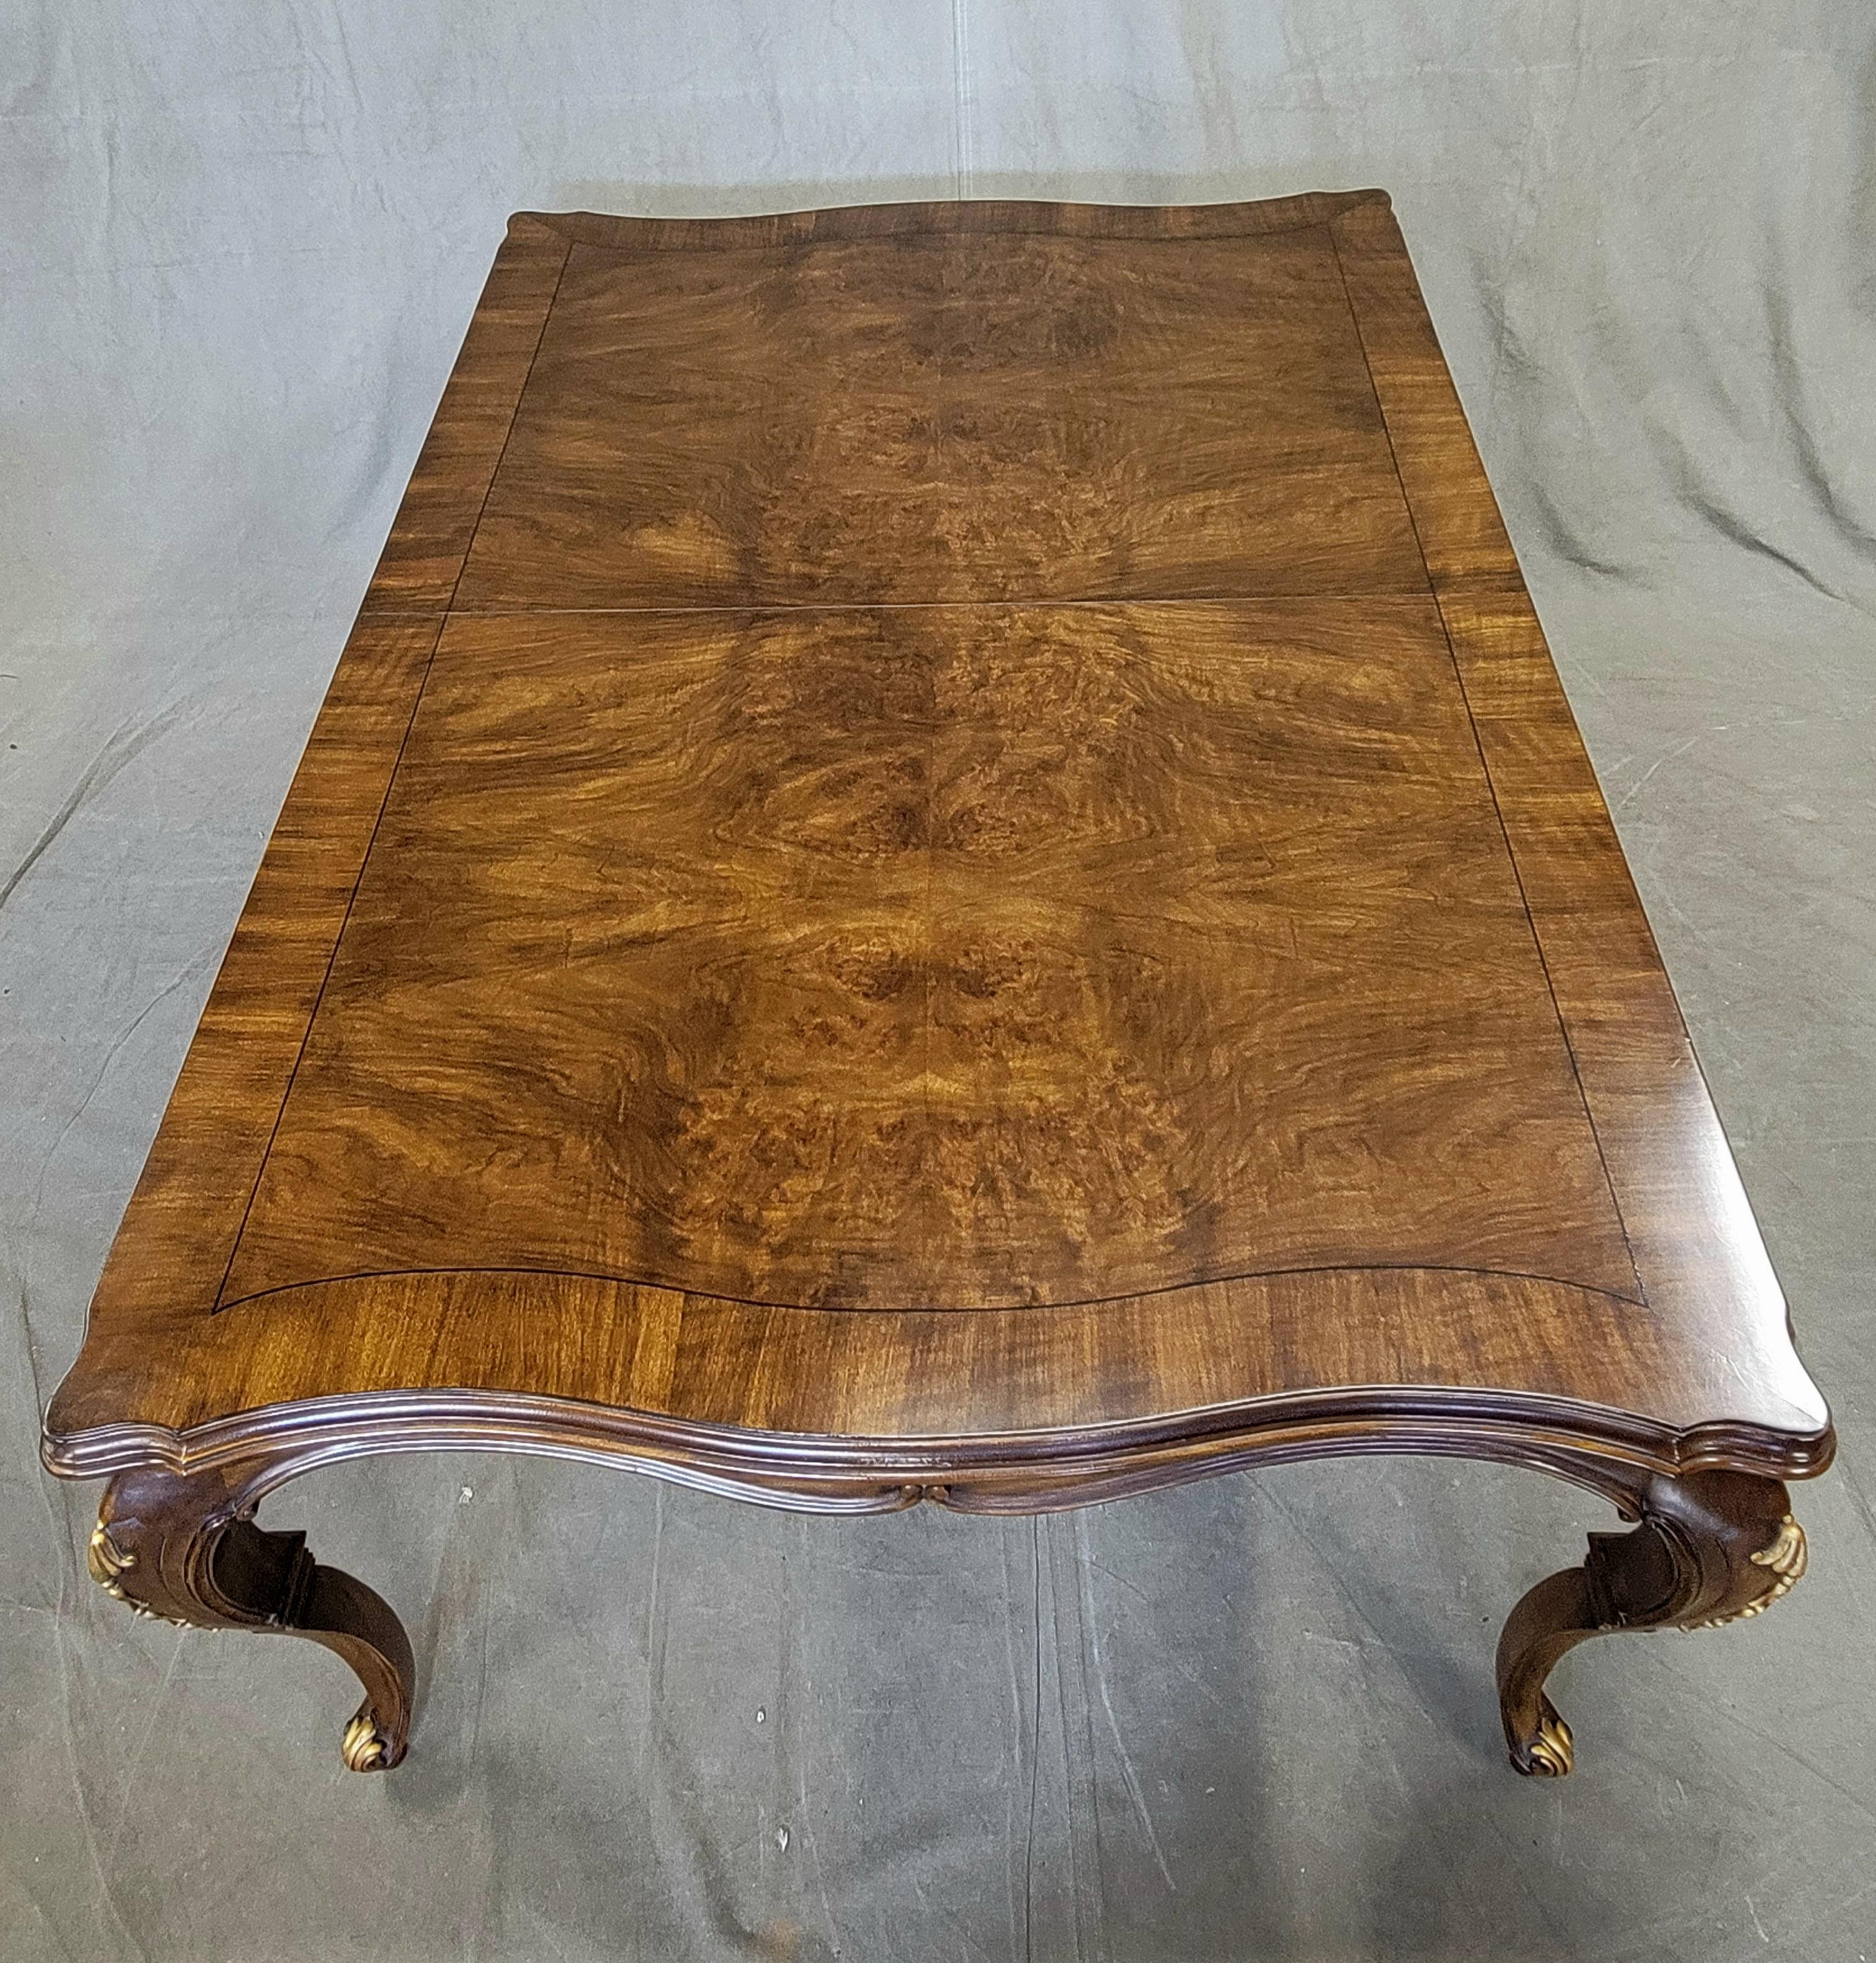 Hand-Crafted Vintage Karges French Louis XV Burl Walnut Dining Room Table With Four Leaves